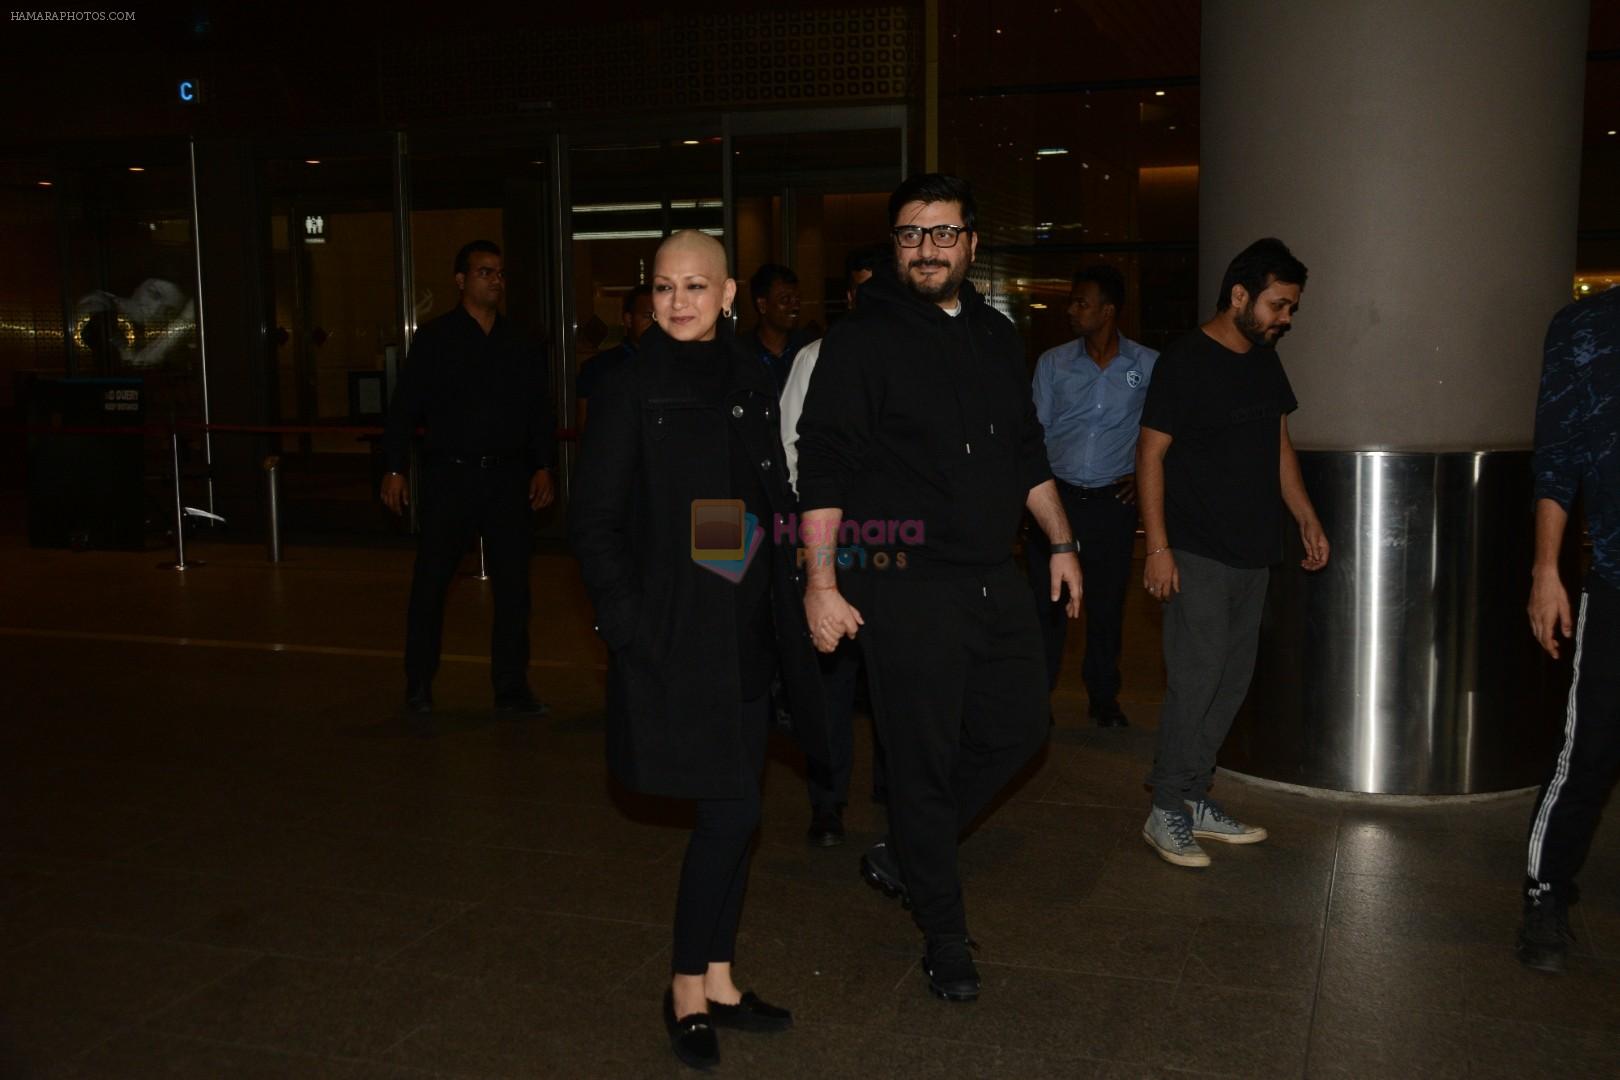 Goldie Behl with Sonali Bendre returns from USA after her treatment on 2nd Dec 2018